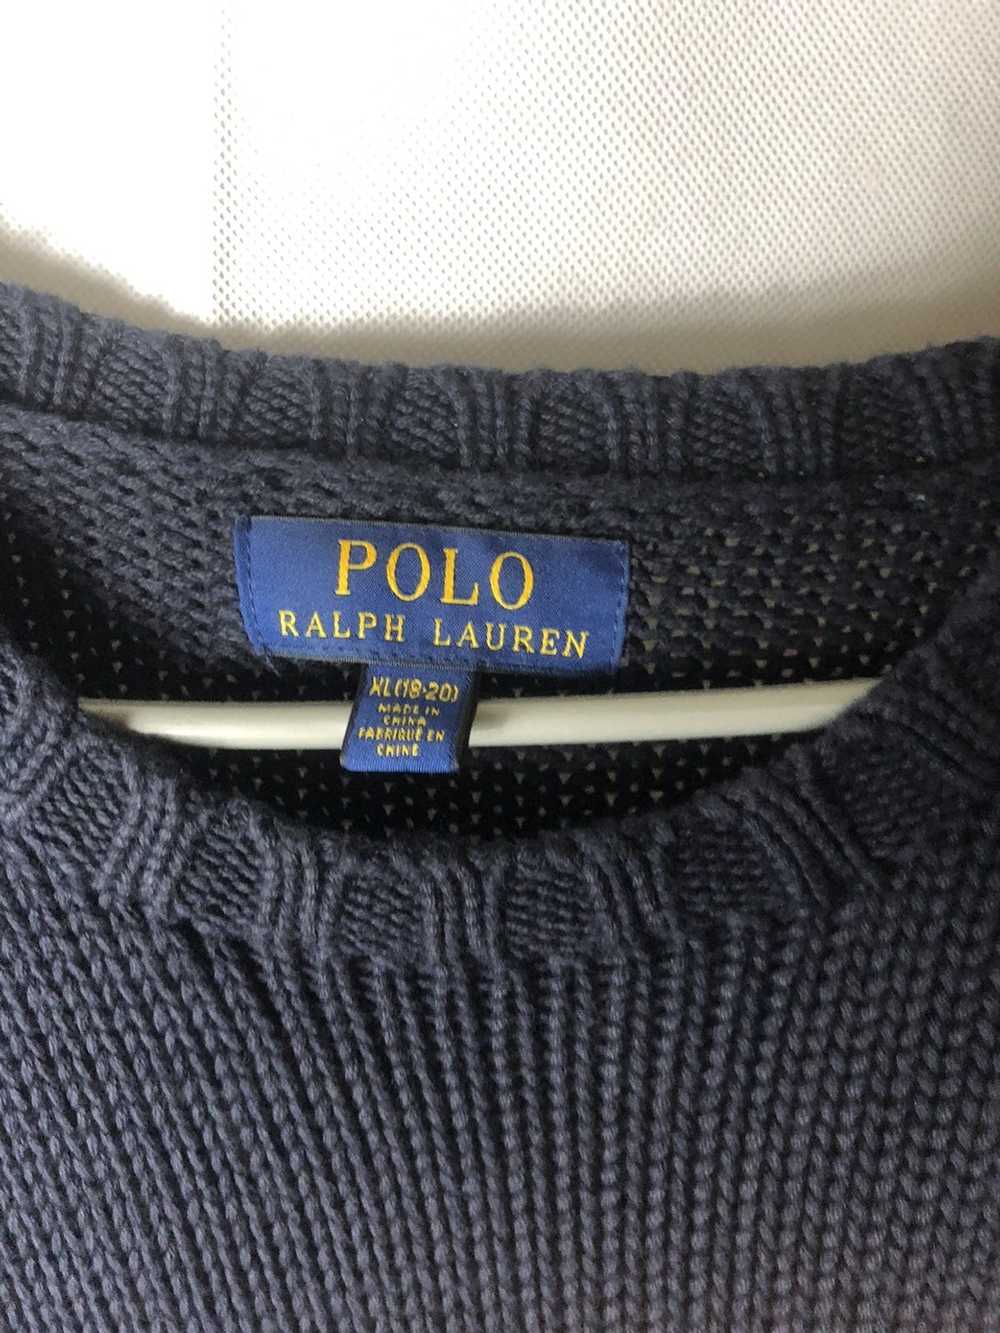 Polo Ralph Lauren American Flag Knit Sweater - image 2